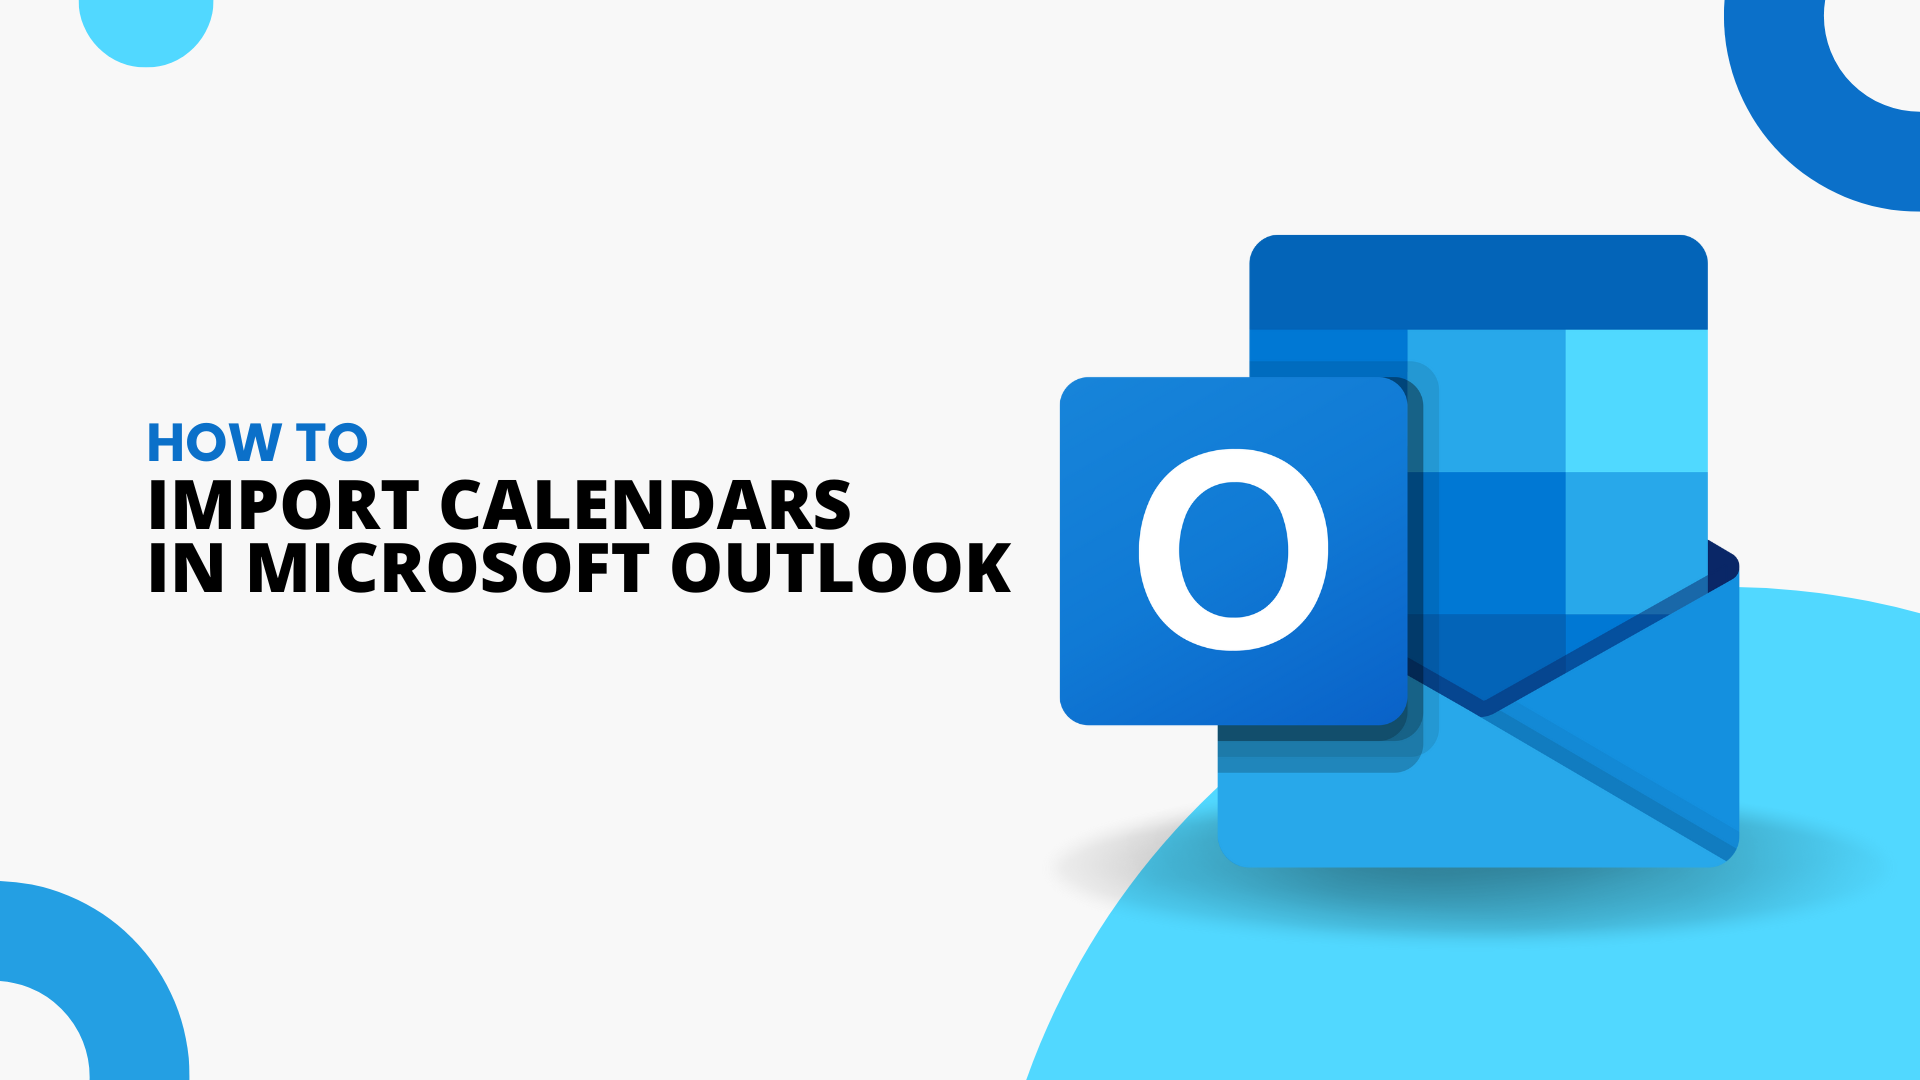 How to Import Calendars in Microsoft Outlook